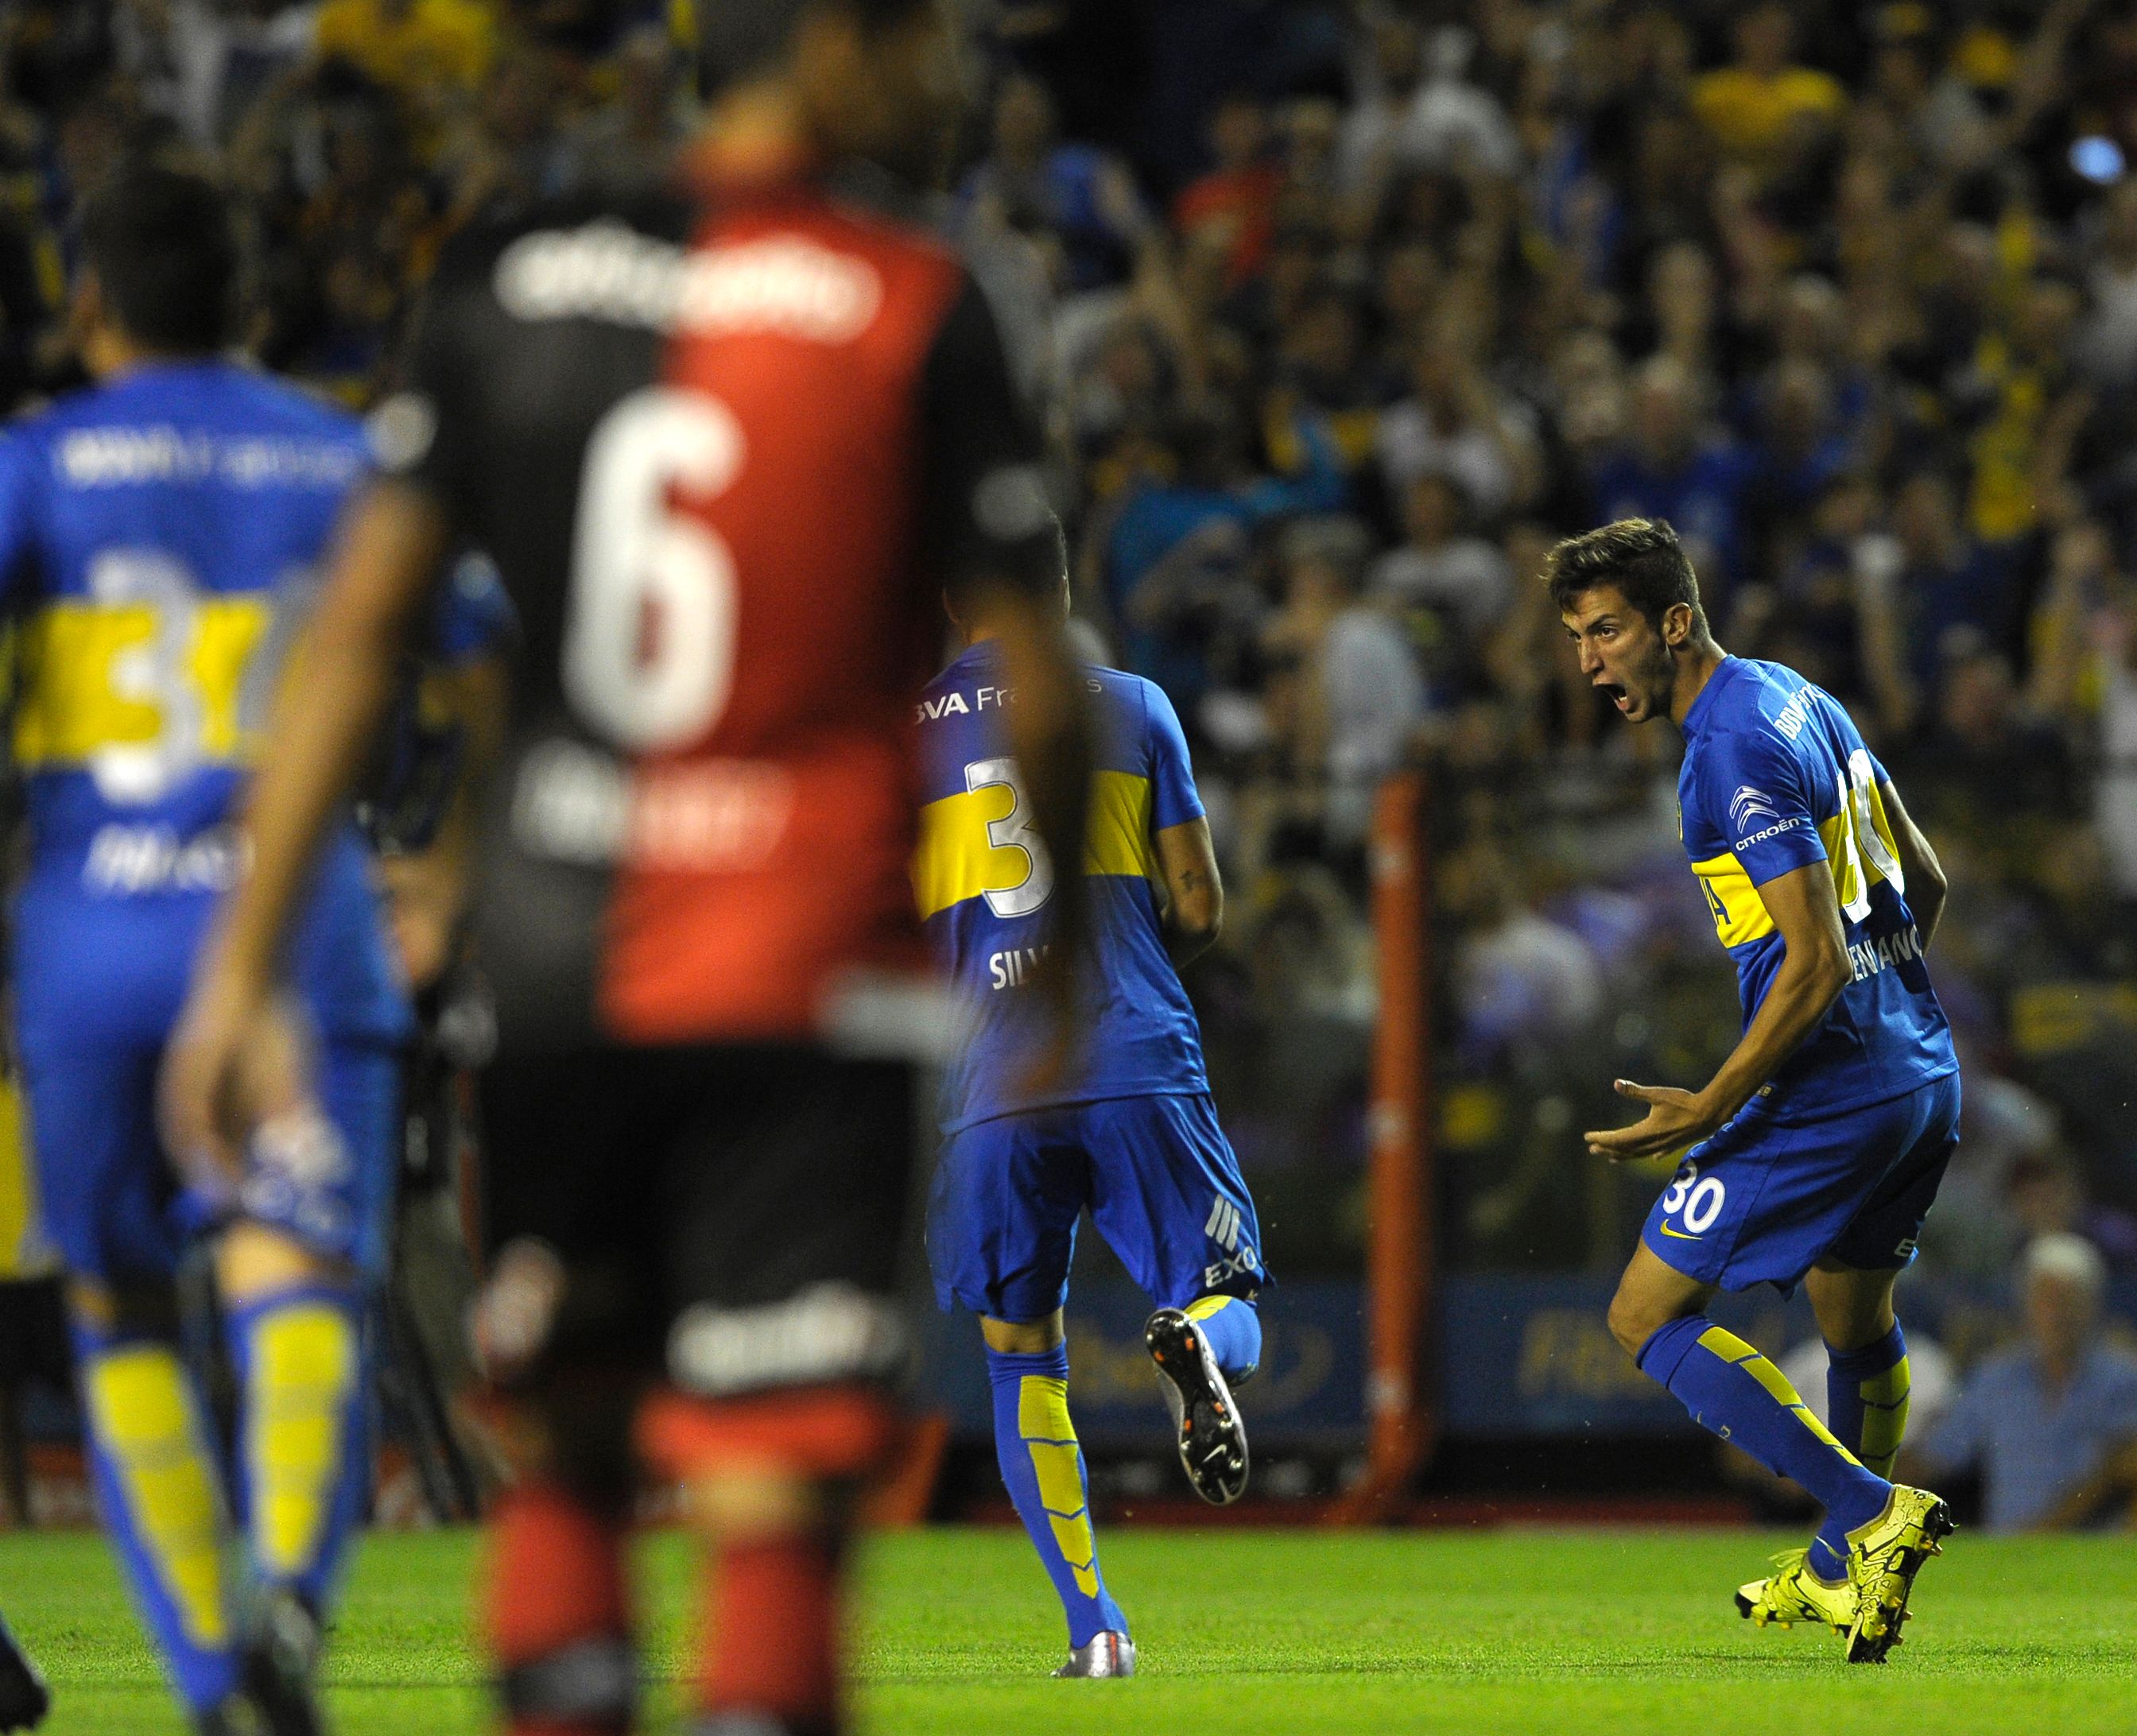 Boca's footballer Rodrigo Bentancur (R) celebrates with teammates after scoring against Newells during their Argentina First Division football match at La Bombonera stadium, in Buenos Aires, Argentina, on February 20, 2016. AFP PHOTO / ALEJANDRO PAGNI / AFP / ALEJANDRO PAGNI        (Photo credit should read ALEJANDRO PAGNI/AFP/Getty Images)